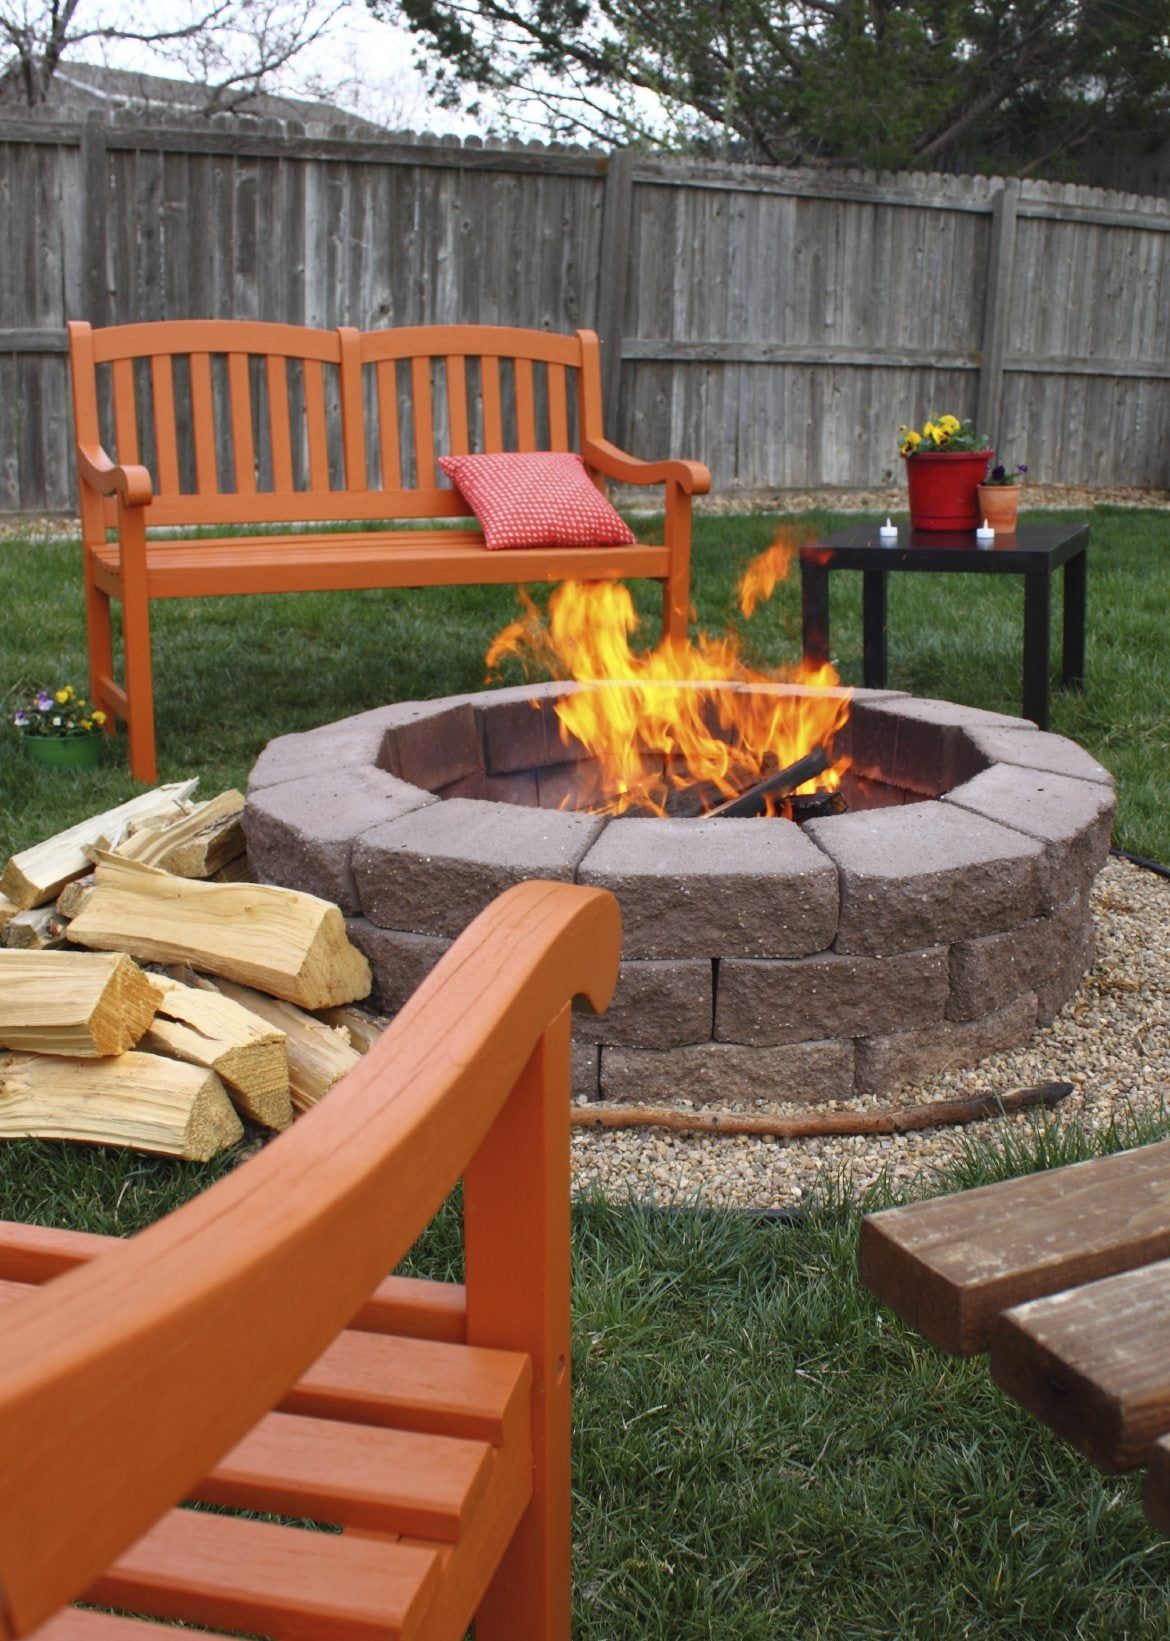 BBQ,.. Smoker and Firepit in one! what a cool combo to have in the back  yard.